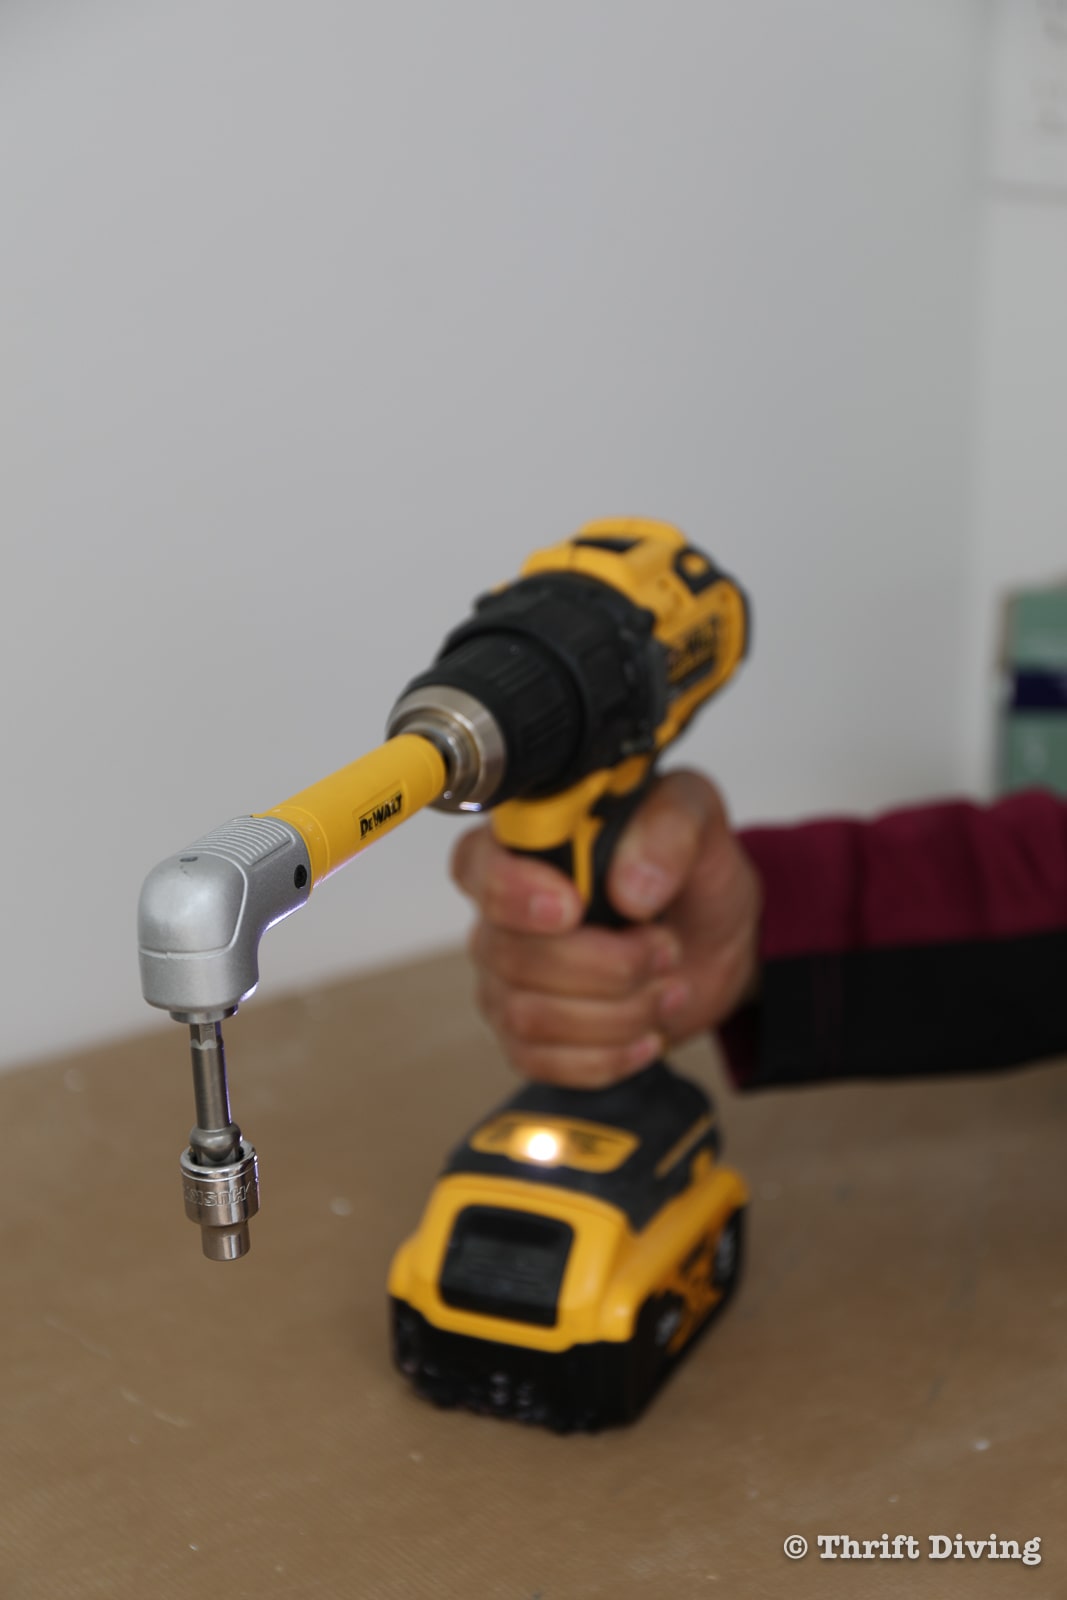 Use a right angle adapter and power drill when installing clips for LED downlights - Thrift Diving